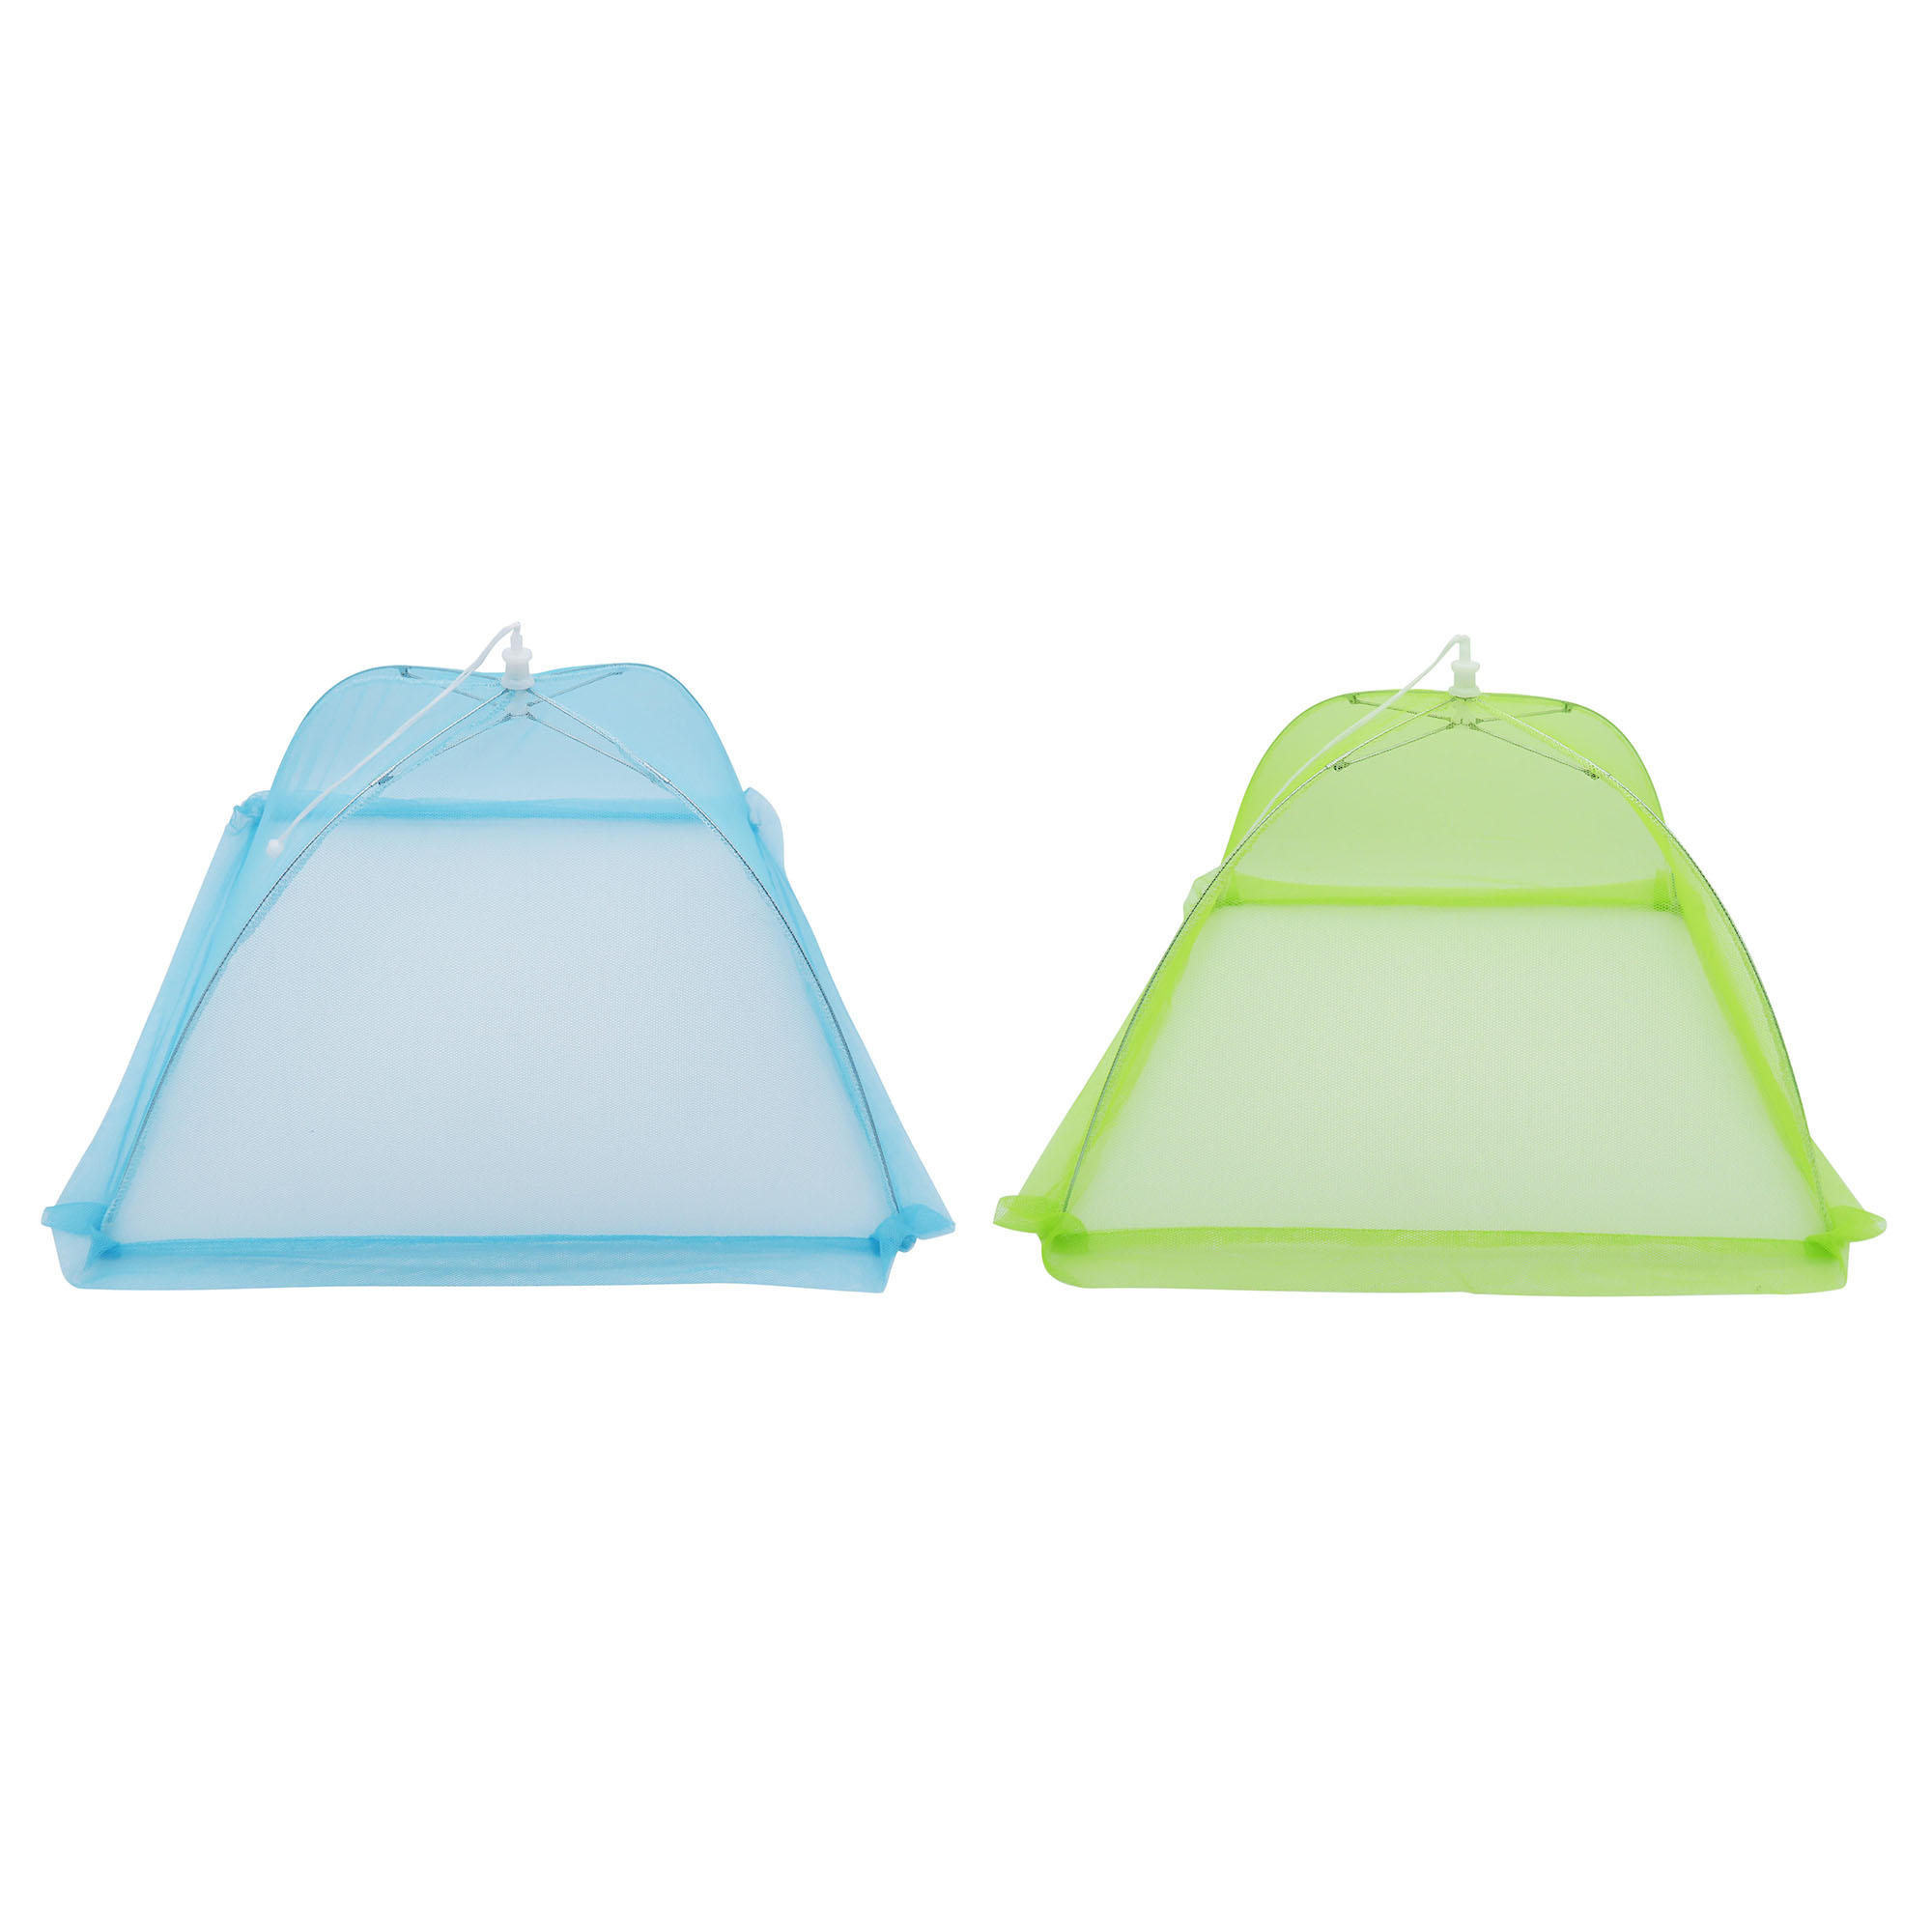 MR.BAR B-Q FOOD TENTS S/2 IN POUCH